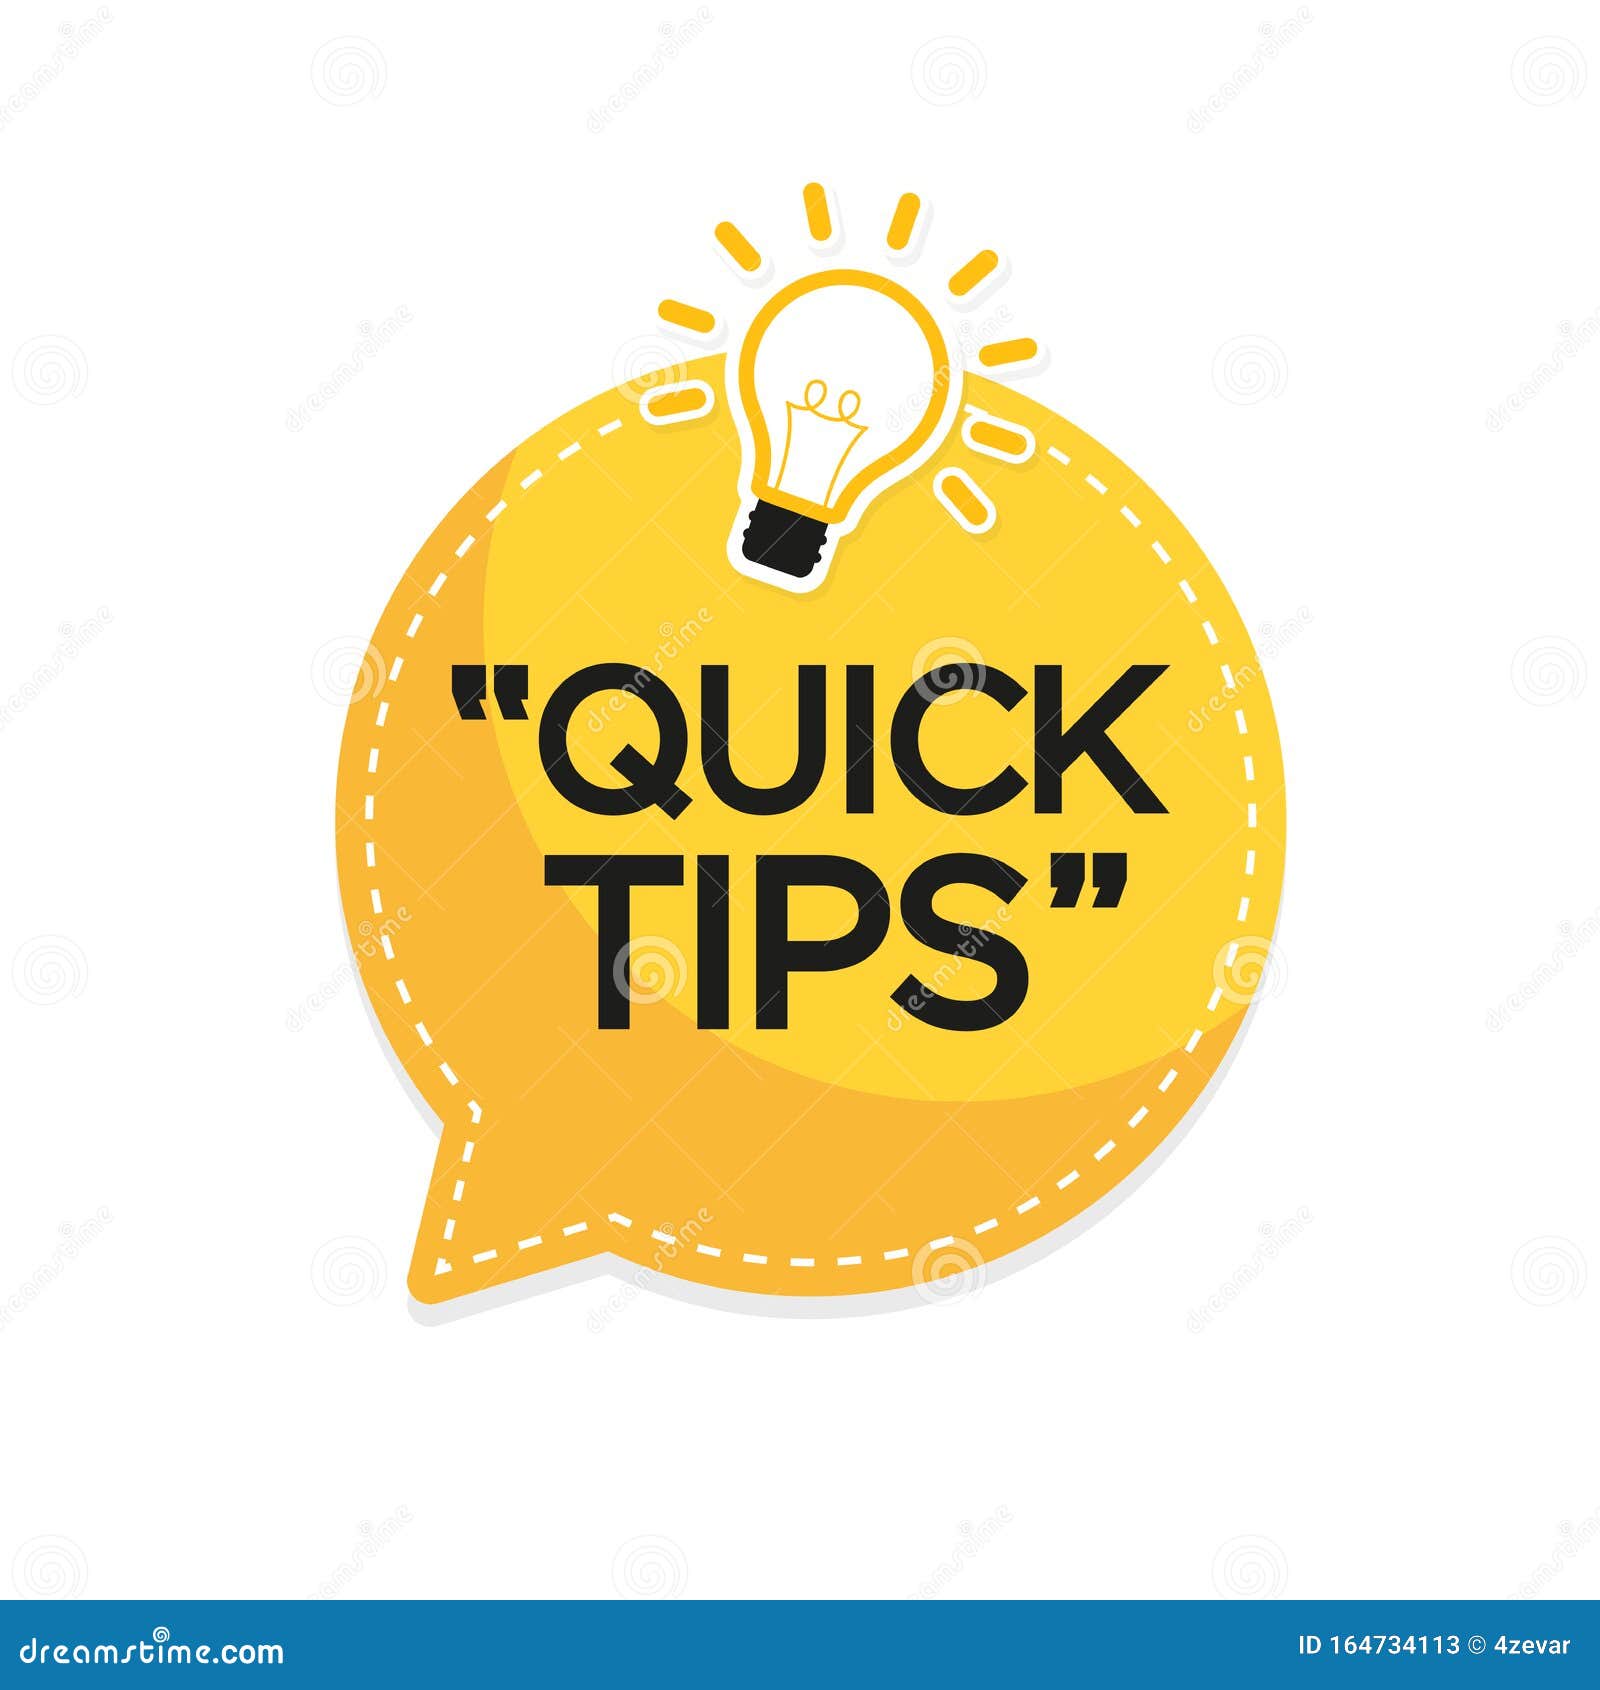 quick tips banner with light bulb.  background